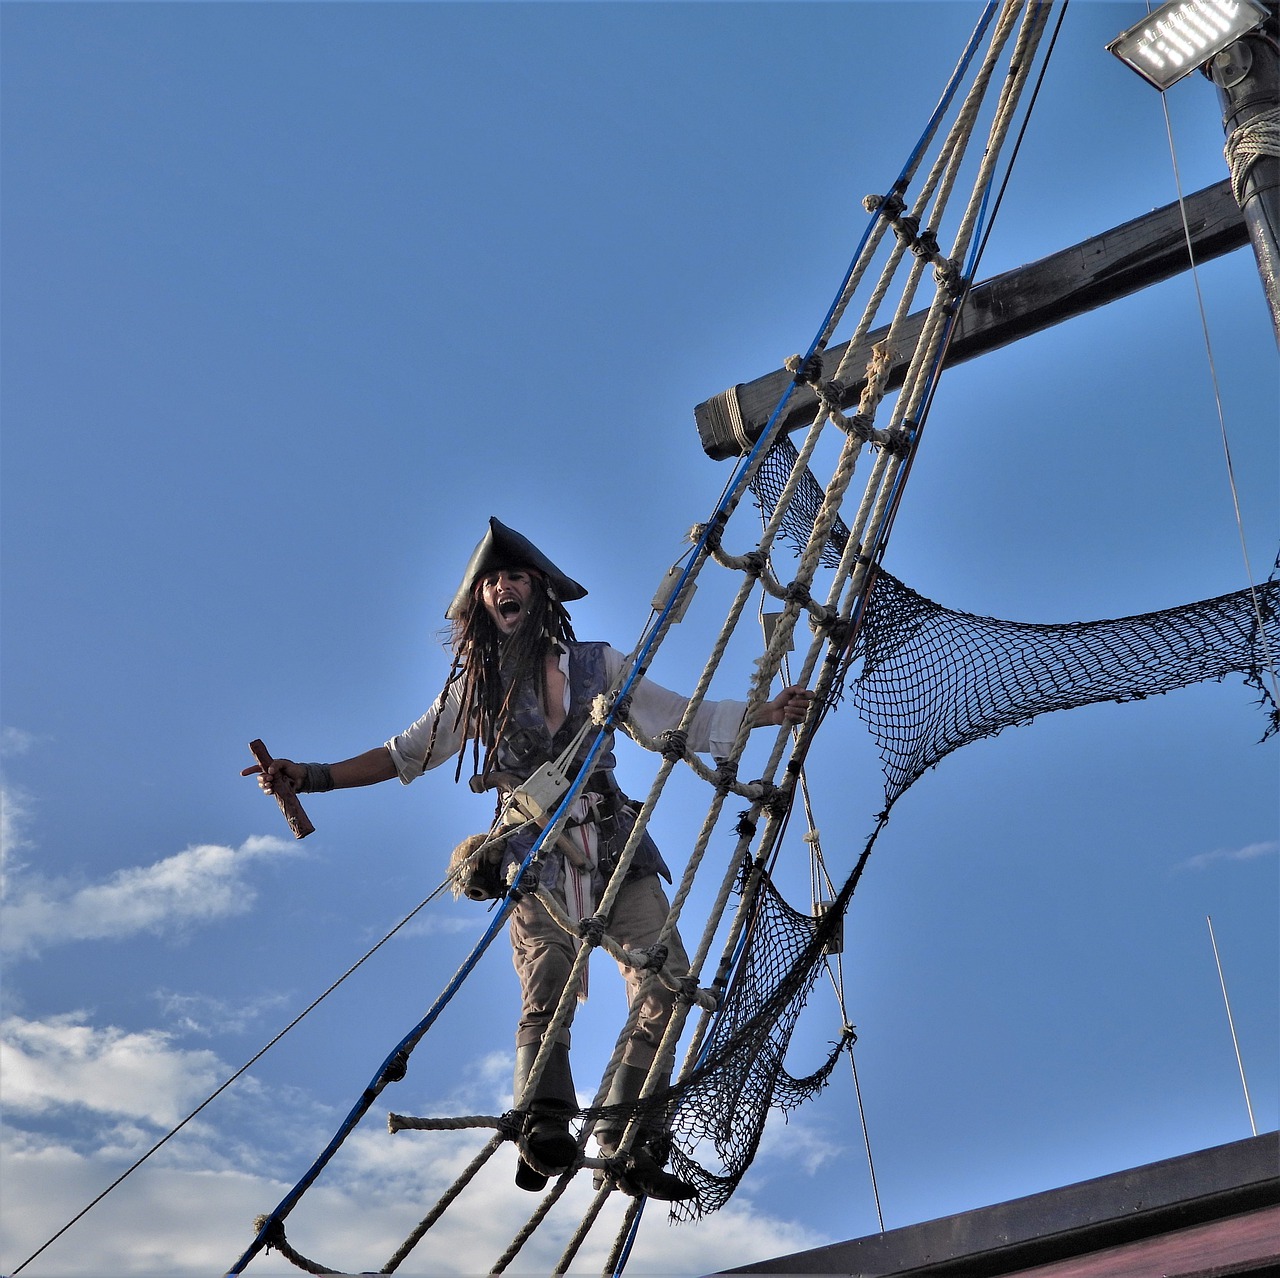 Pirate, caribbean, pirates, ship, ocean - free image from